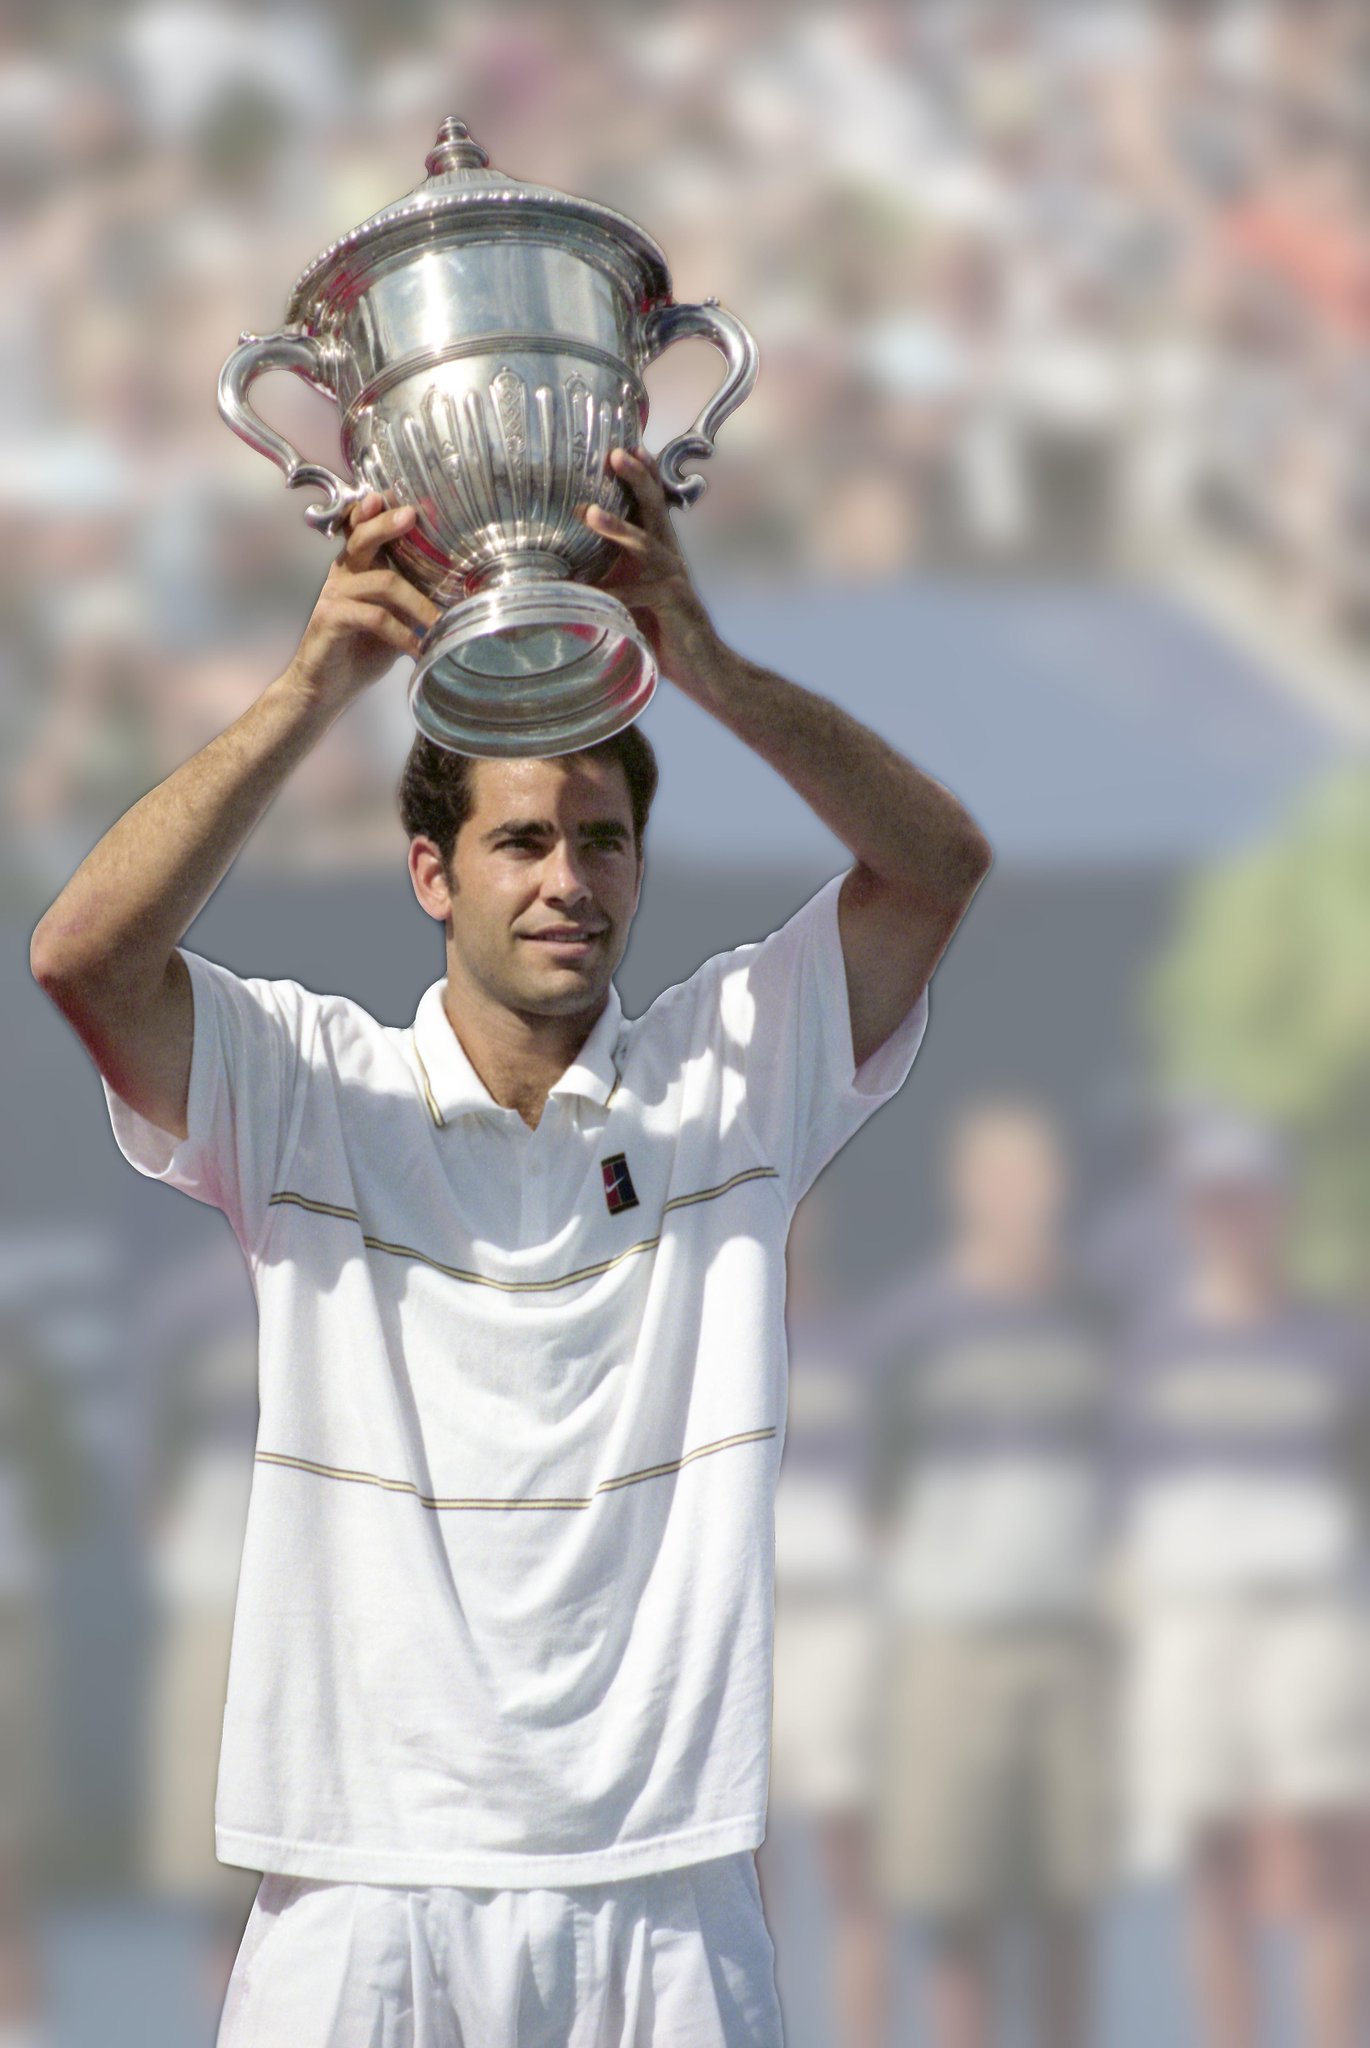 Happy birthday to former no.1 player Pete Sampras, who turned 44 today! 